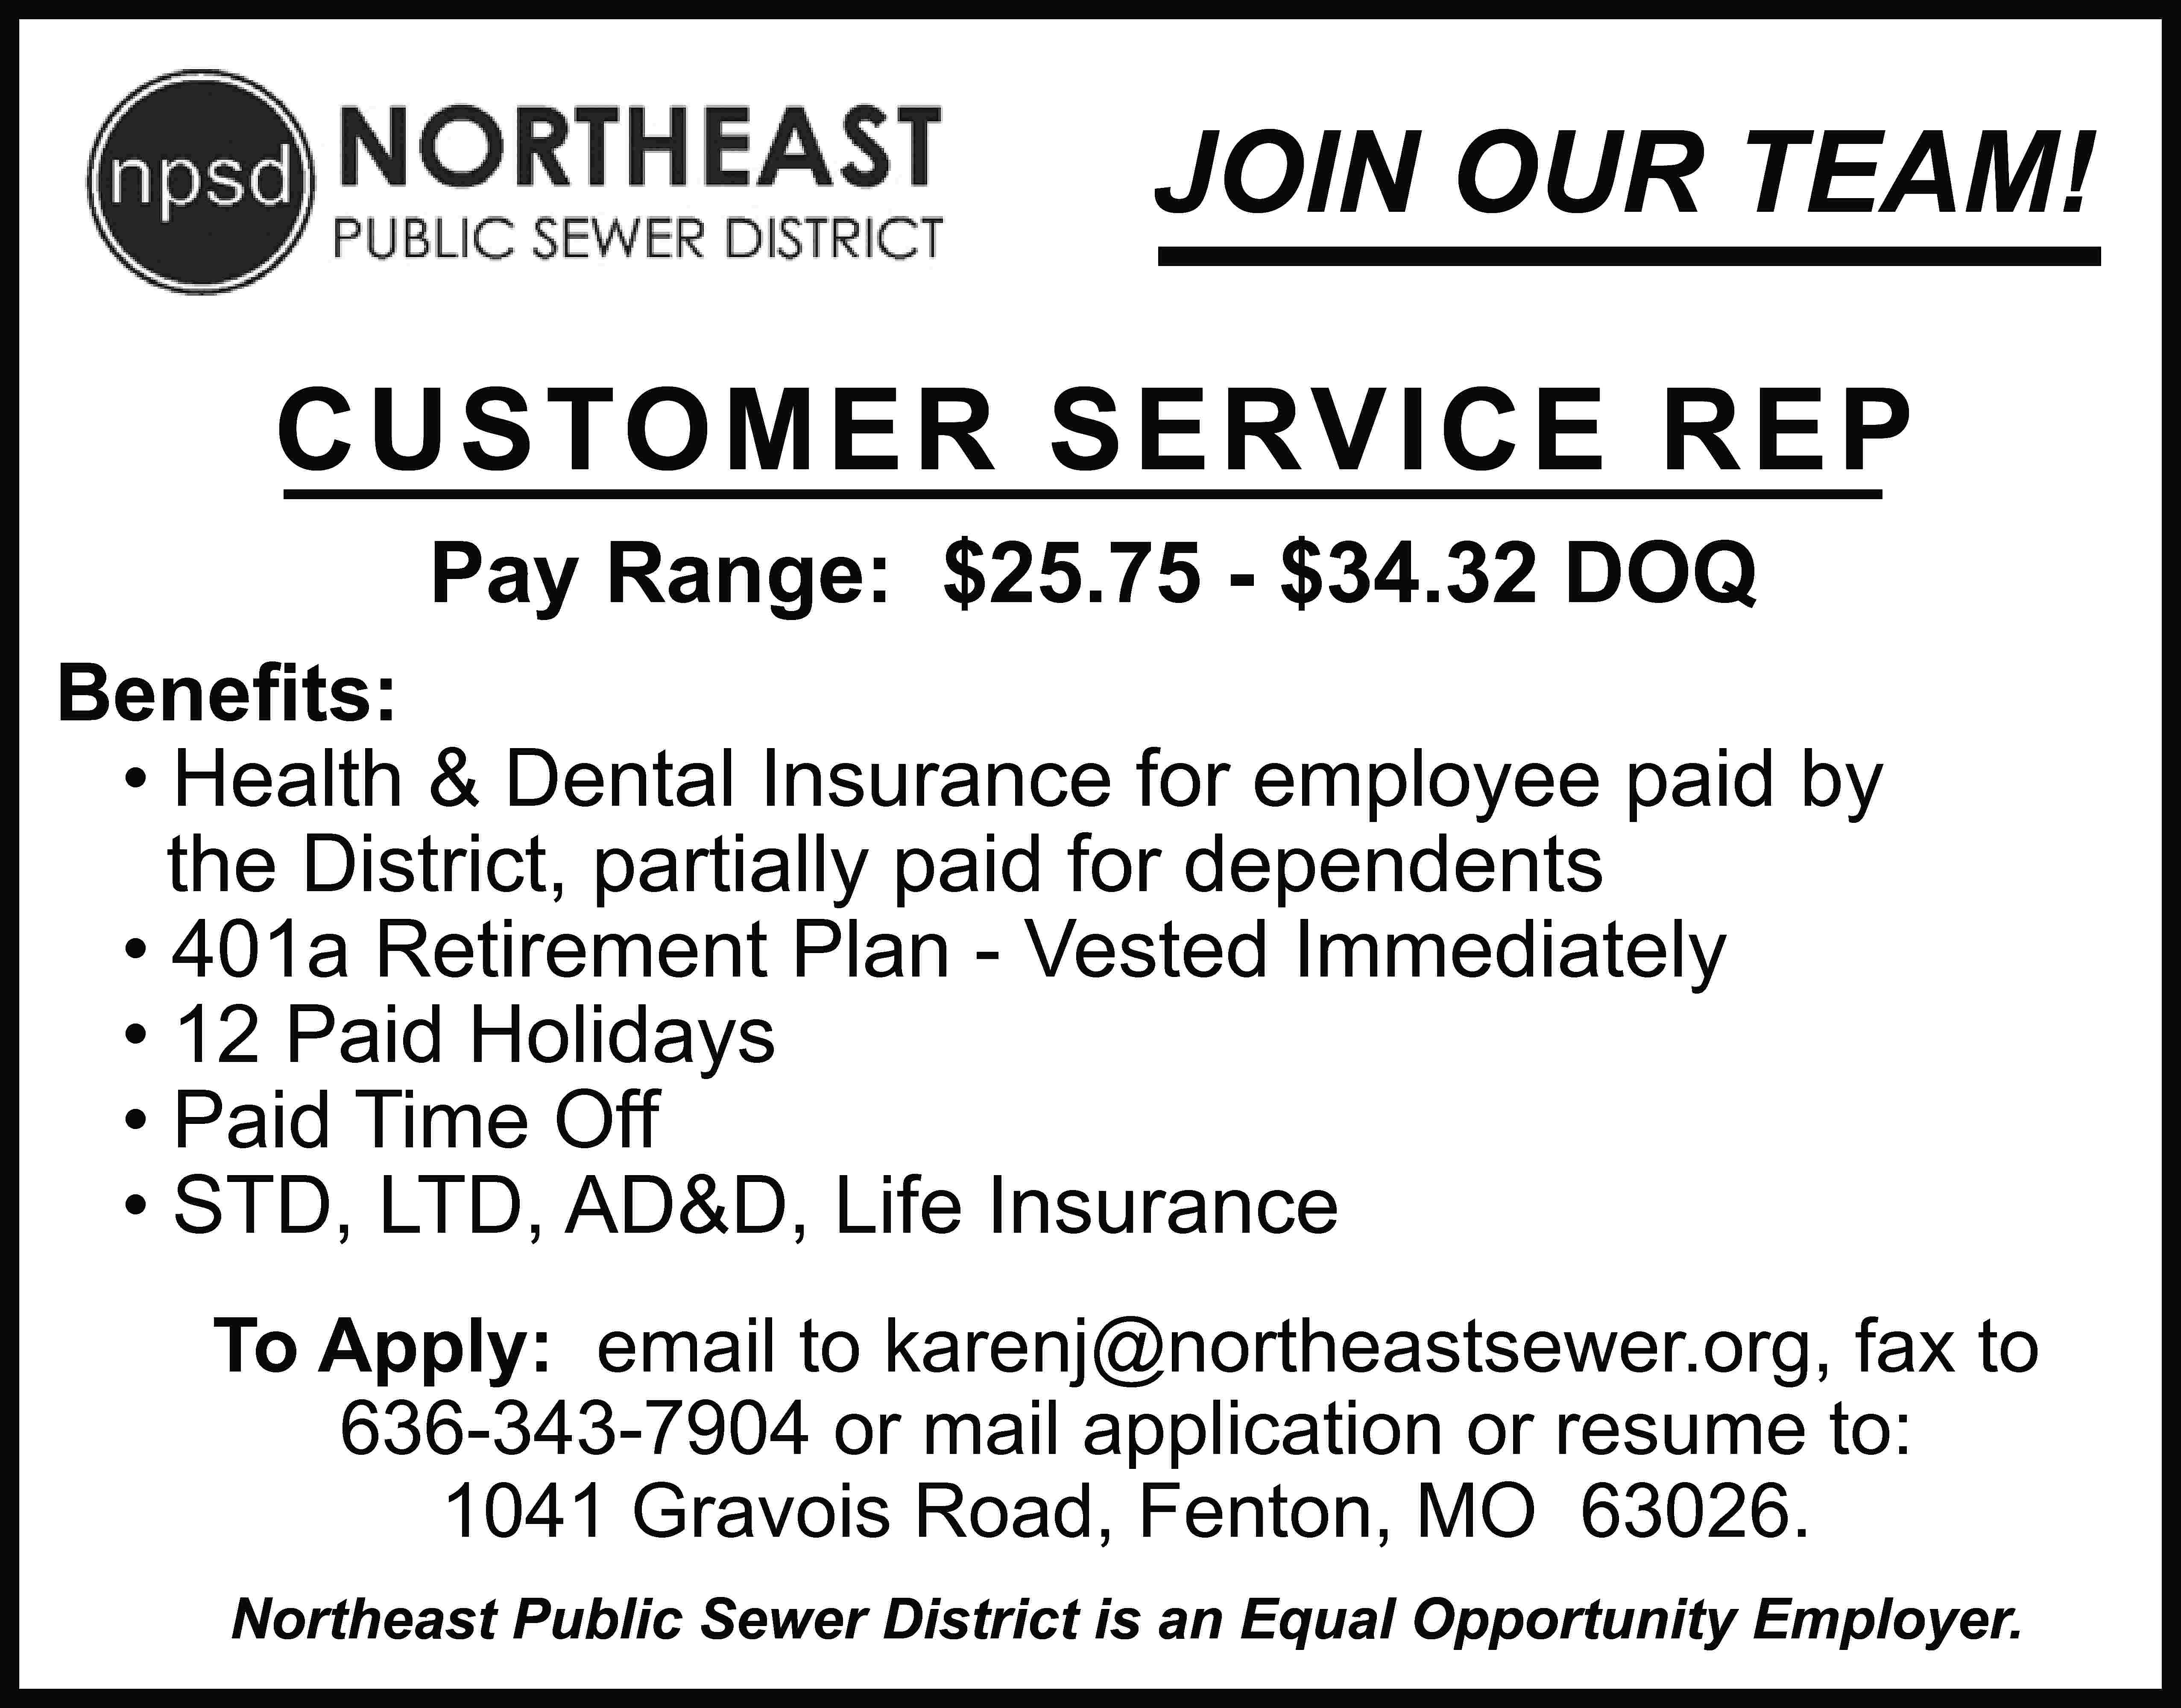 JOIN OUR TEAM! CUSTOMER SERVICE  JOIN OUR TEAM! CUSTOMER SERVICE REP Pay Range: $25.75 - $34.32 DOQ Beneﬁts: • Health & Dental Insurance for employee paid by the District, partially paid for dependents • 401a Retirement Plan - Vested Immediately • 12 Paid Holidays • Paid Time Off • STD, LTD, AD&D, Life Insurance To Apply: email to karenj@northeastsewer.org, fax to 636-343-7904 or mail application or resume to: 1041 Gravois Road, Fenton, MO 63026. Northeast Public Sewer District is an Equal Opportunity Employer.